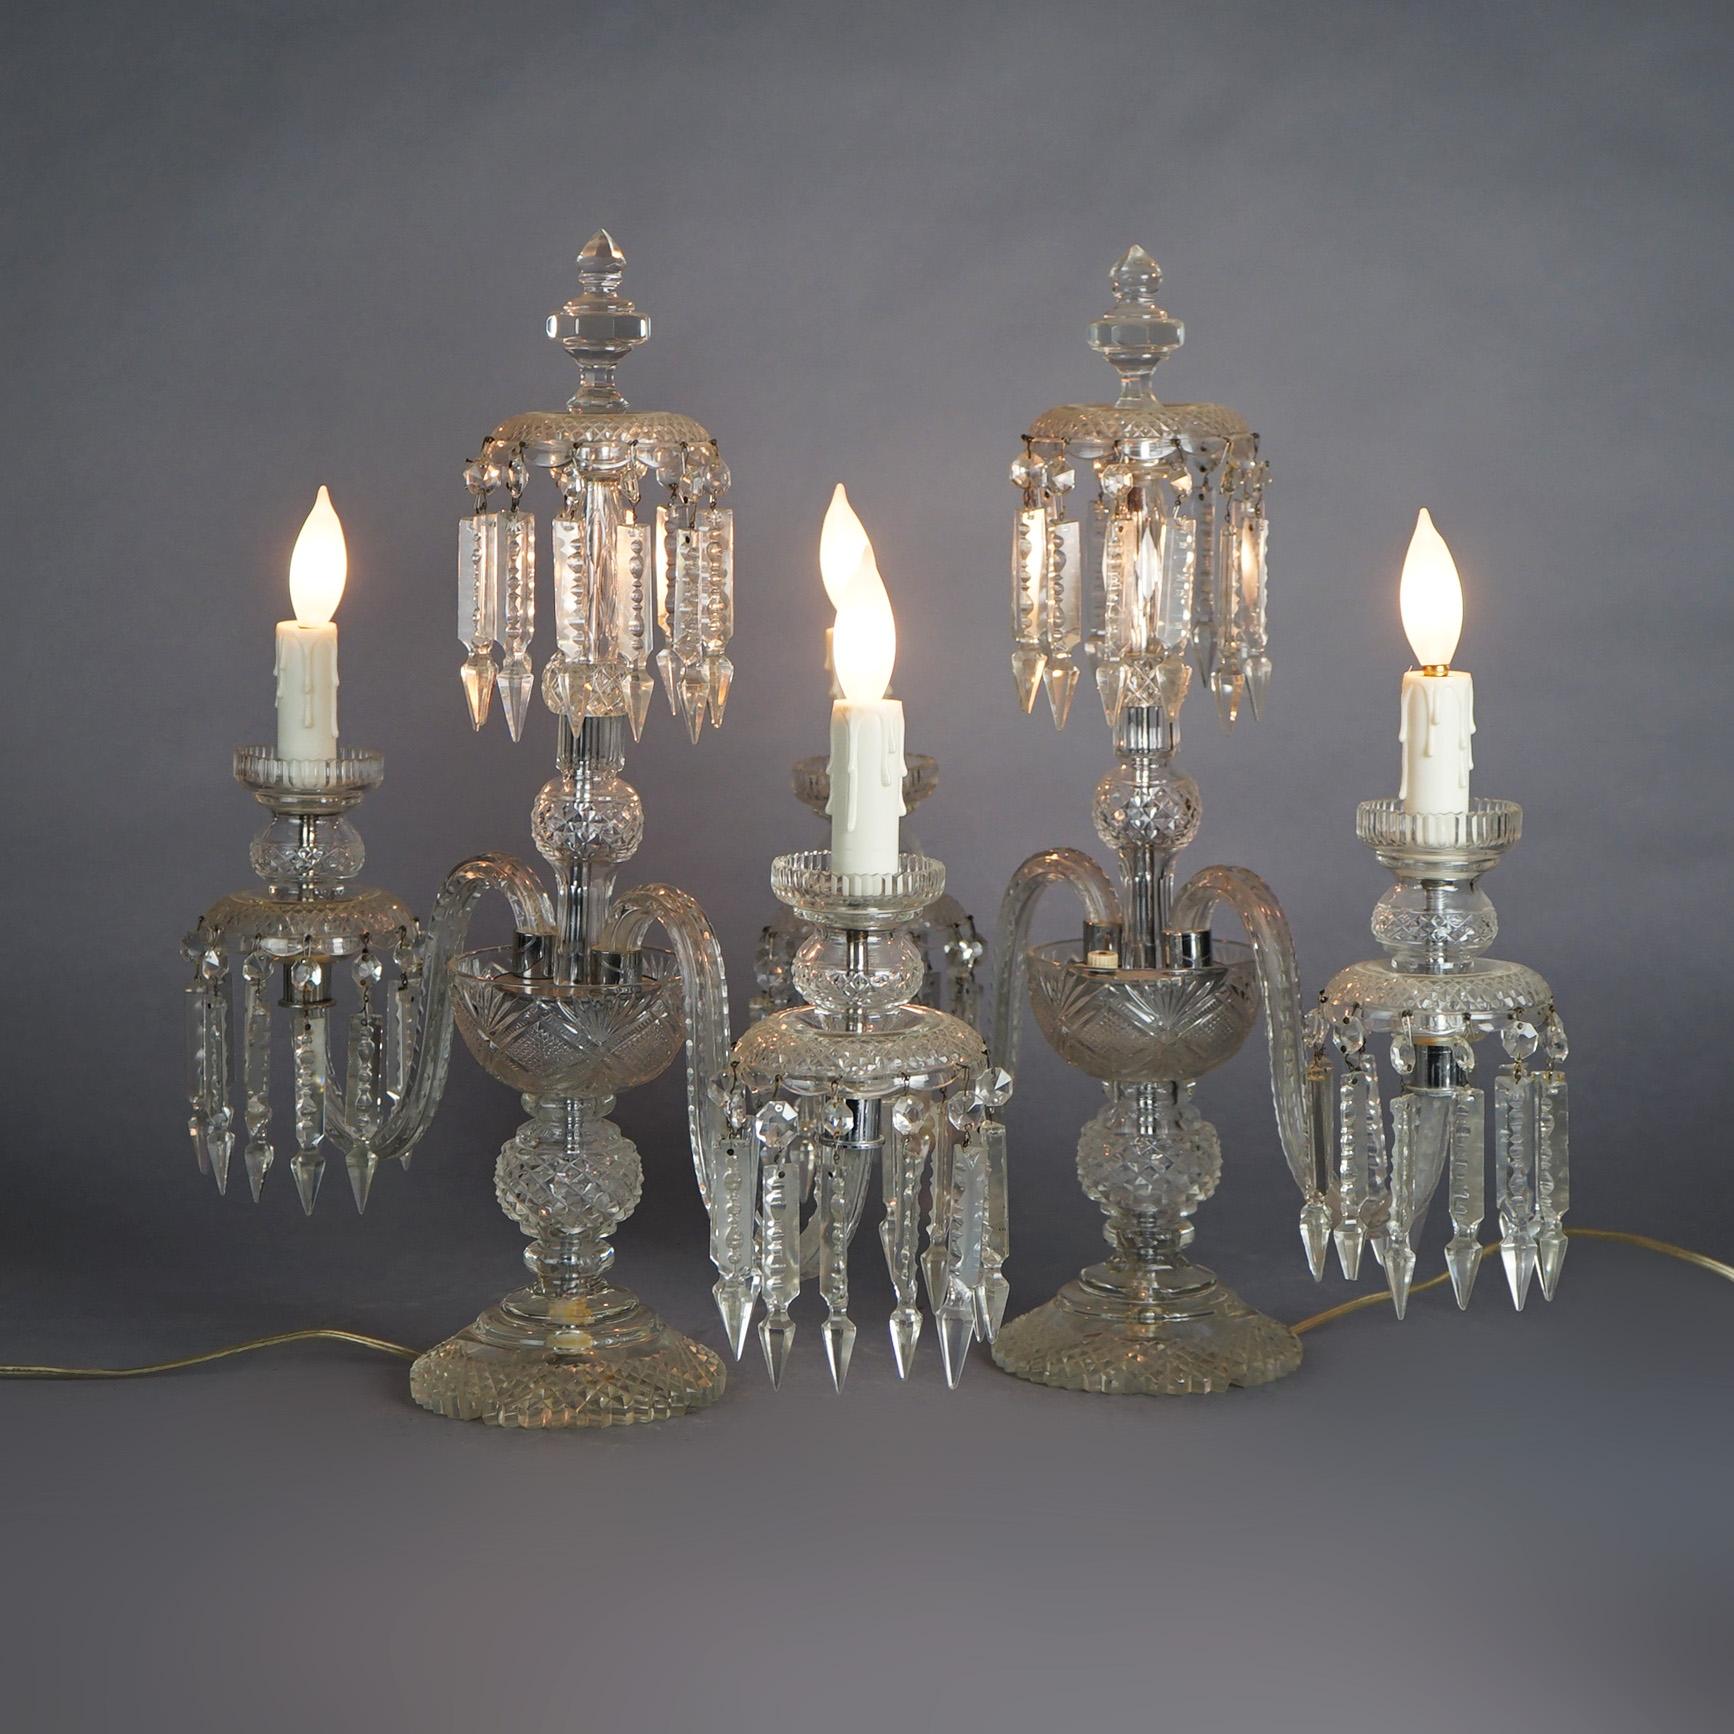 Antique Matching Pair of Cut Glass & Crystal Candelabra Table Lamps Circa 1920

Measure - 21